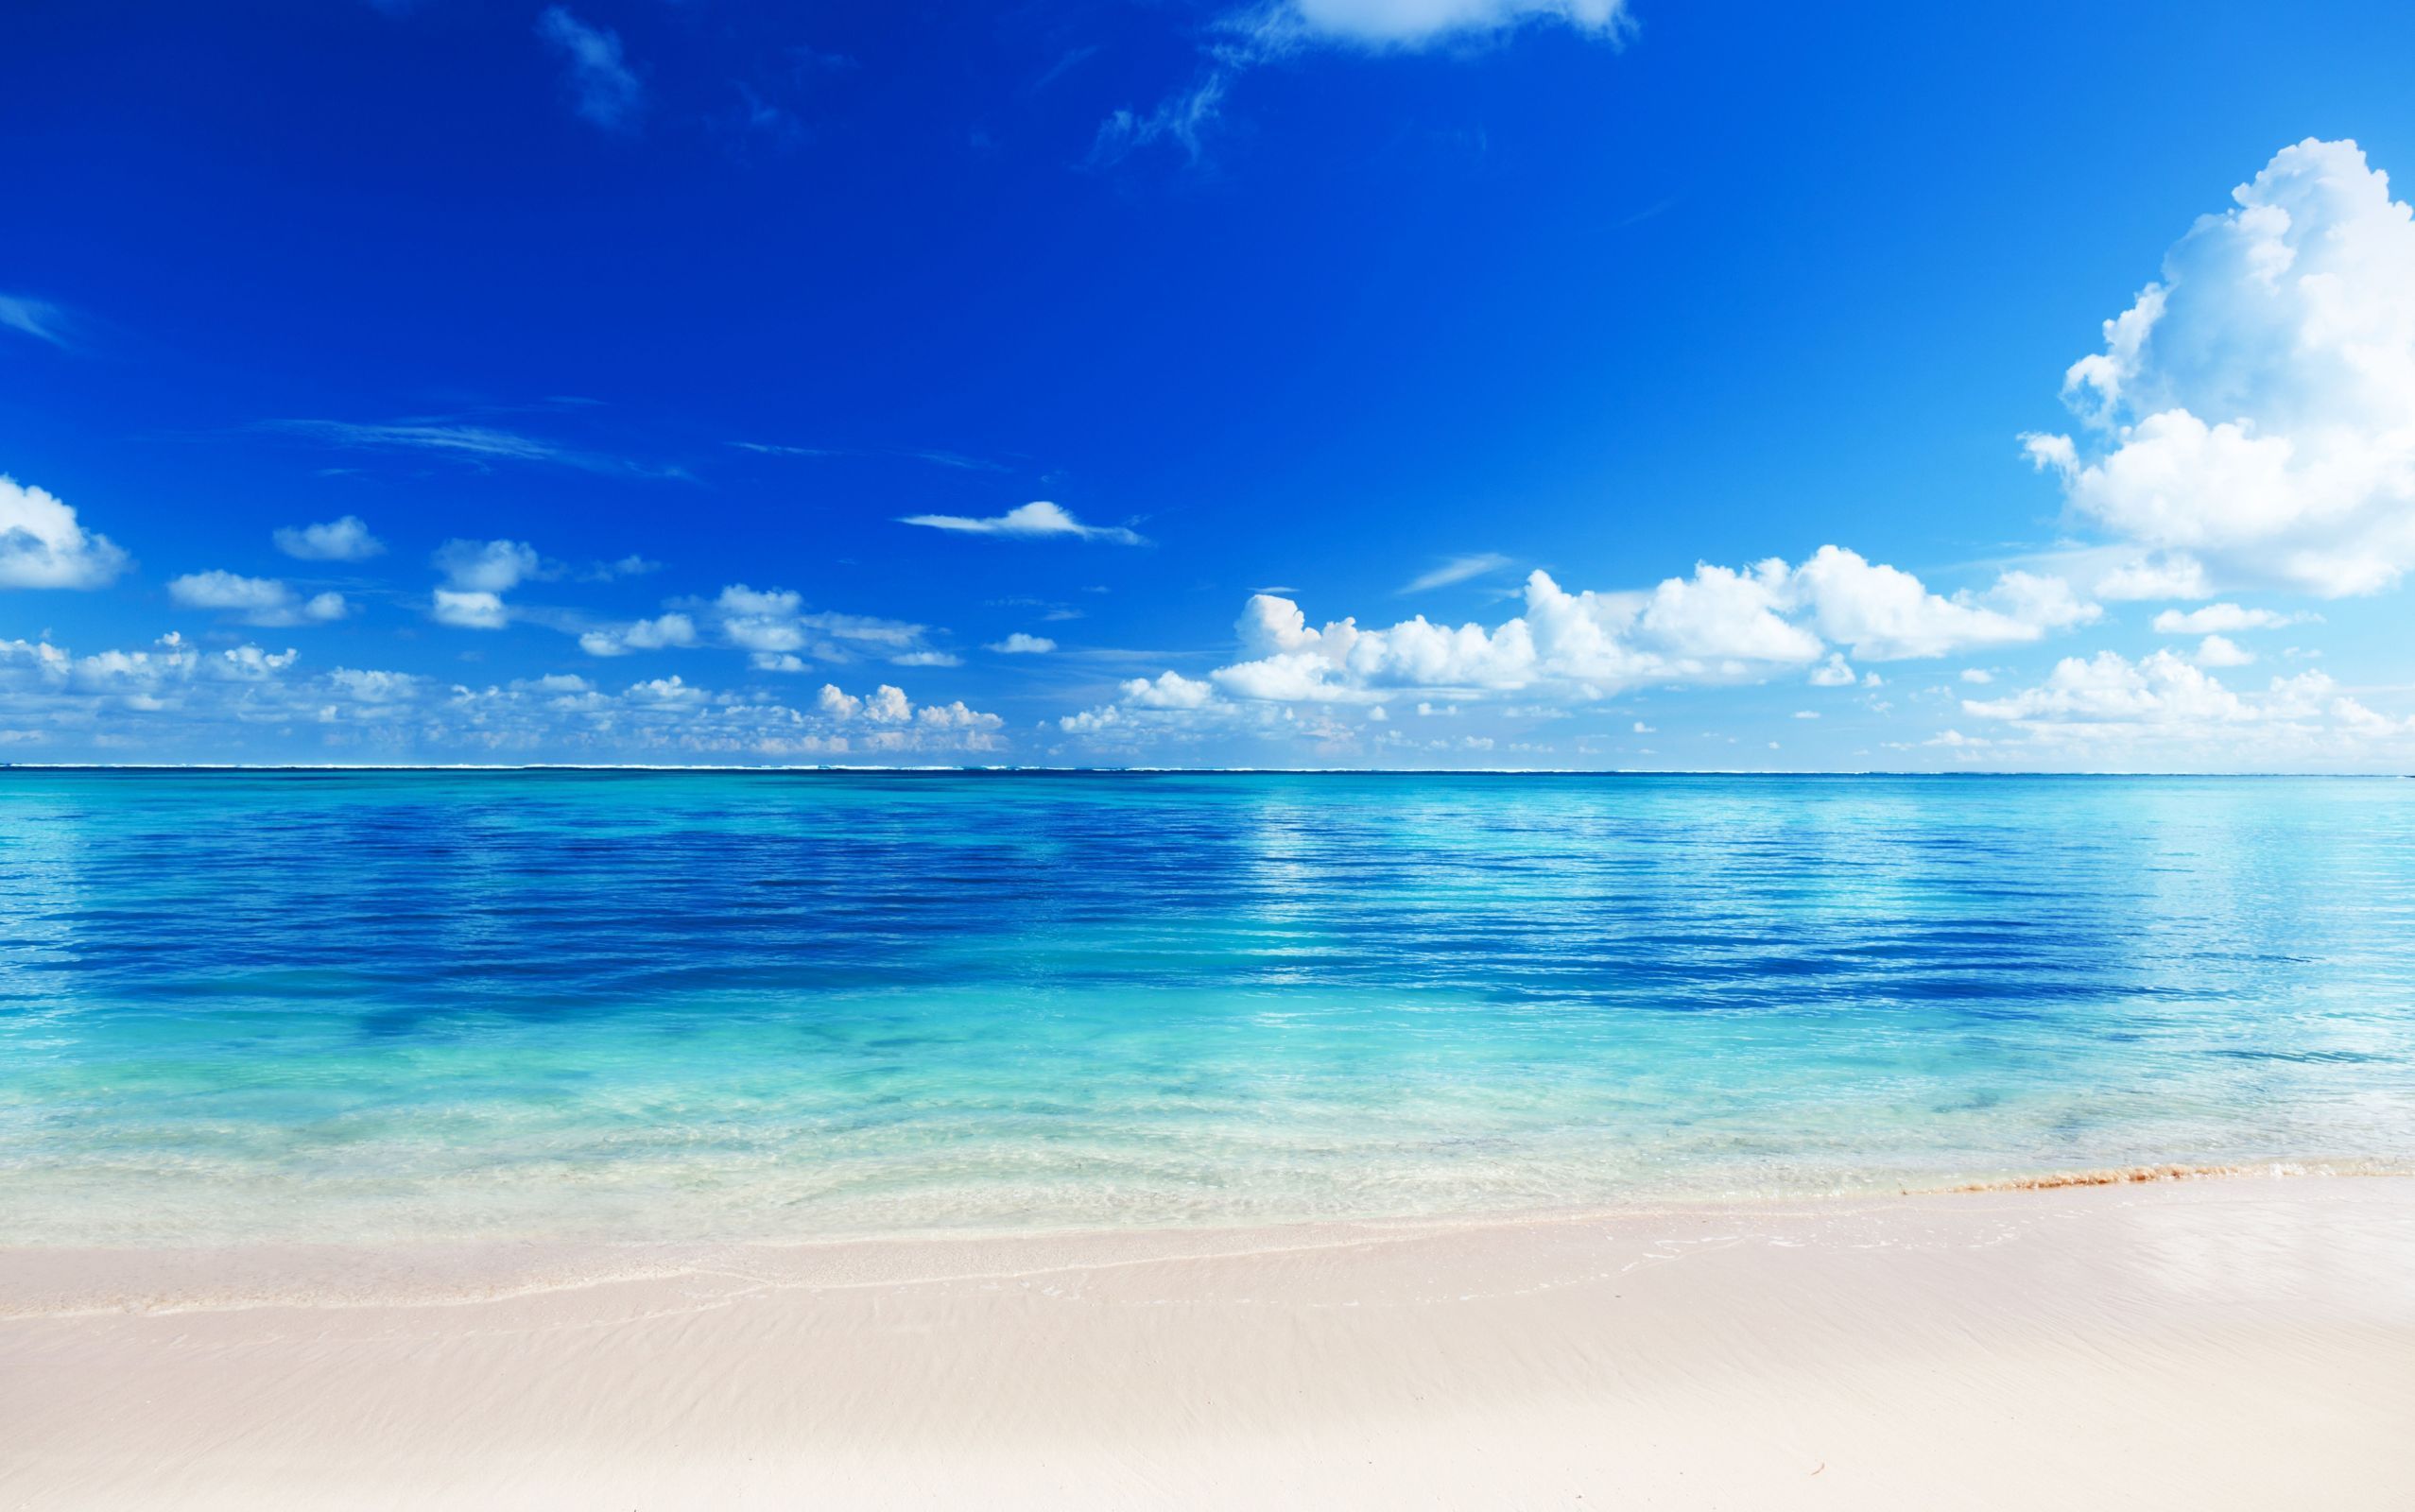 Blue Beach Wallpapers Lovely Blue Beach Image Pc 16647